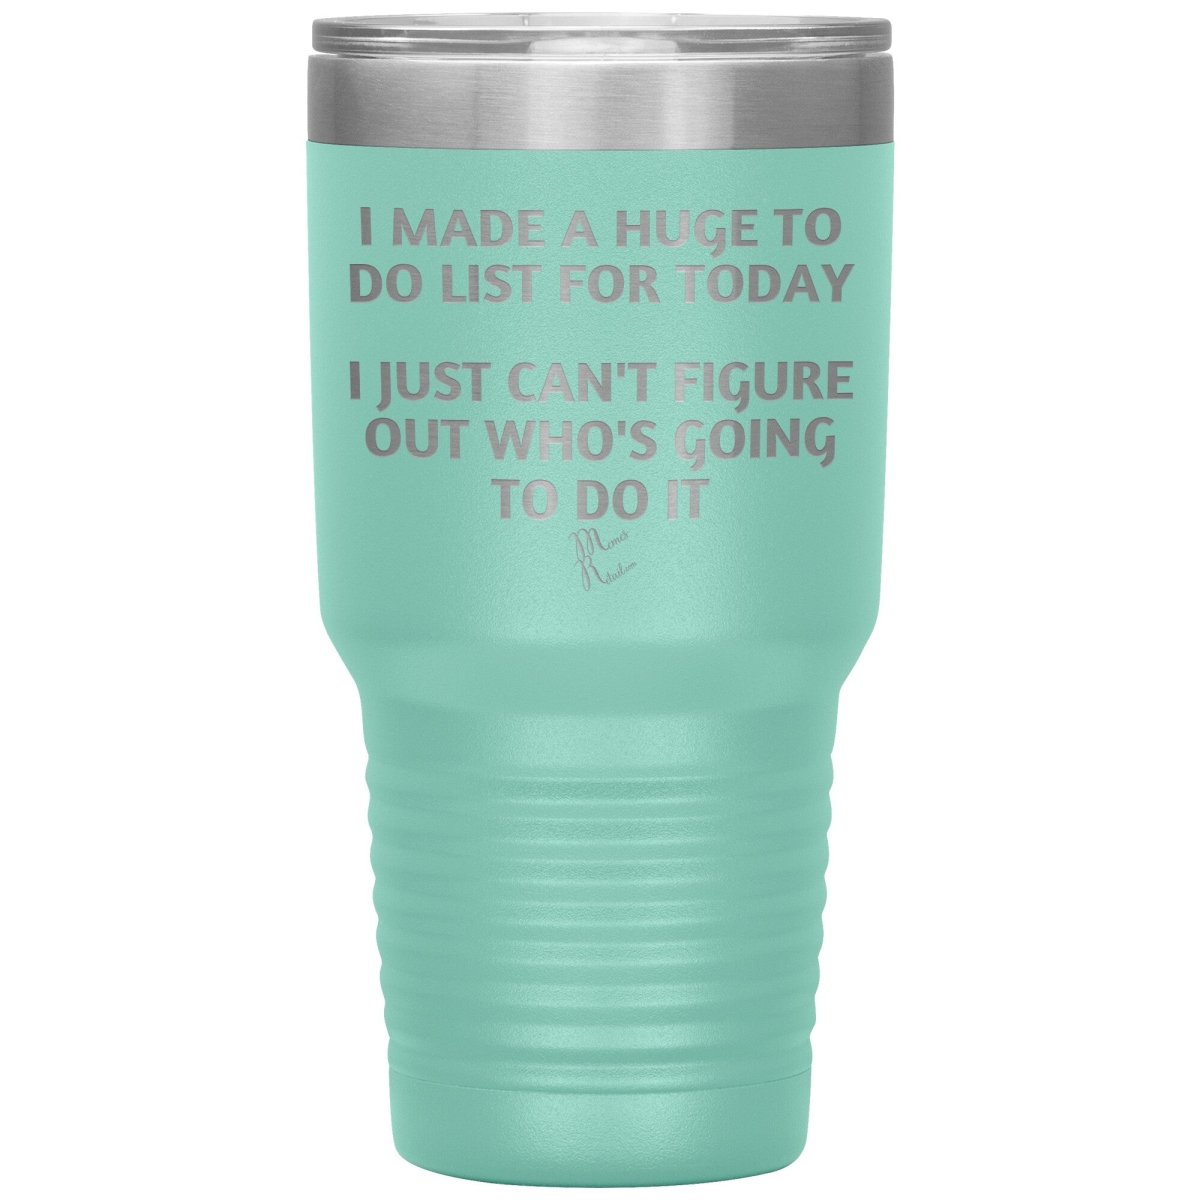 I made a huge to do list for today. I just can't figure out who's going to do it Tumblers, 30oz Insulated Tumbler / Teal - MemesRetail.com